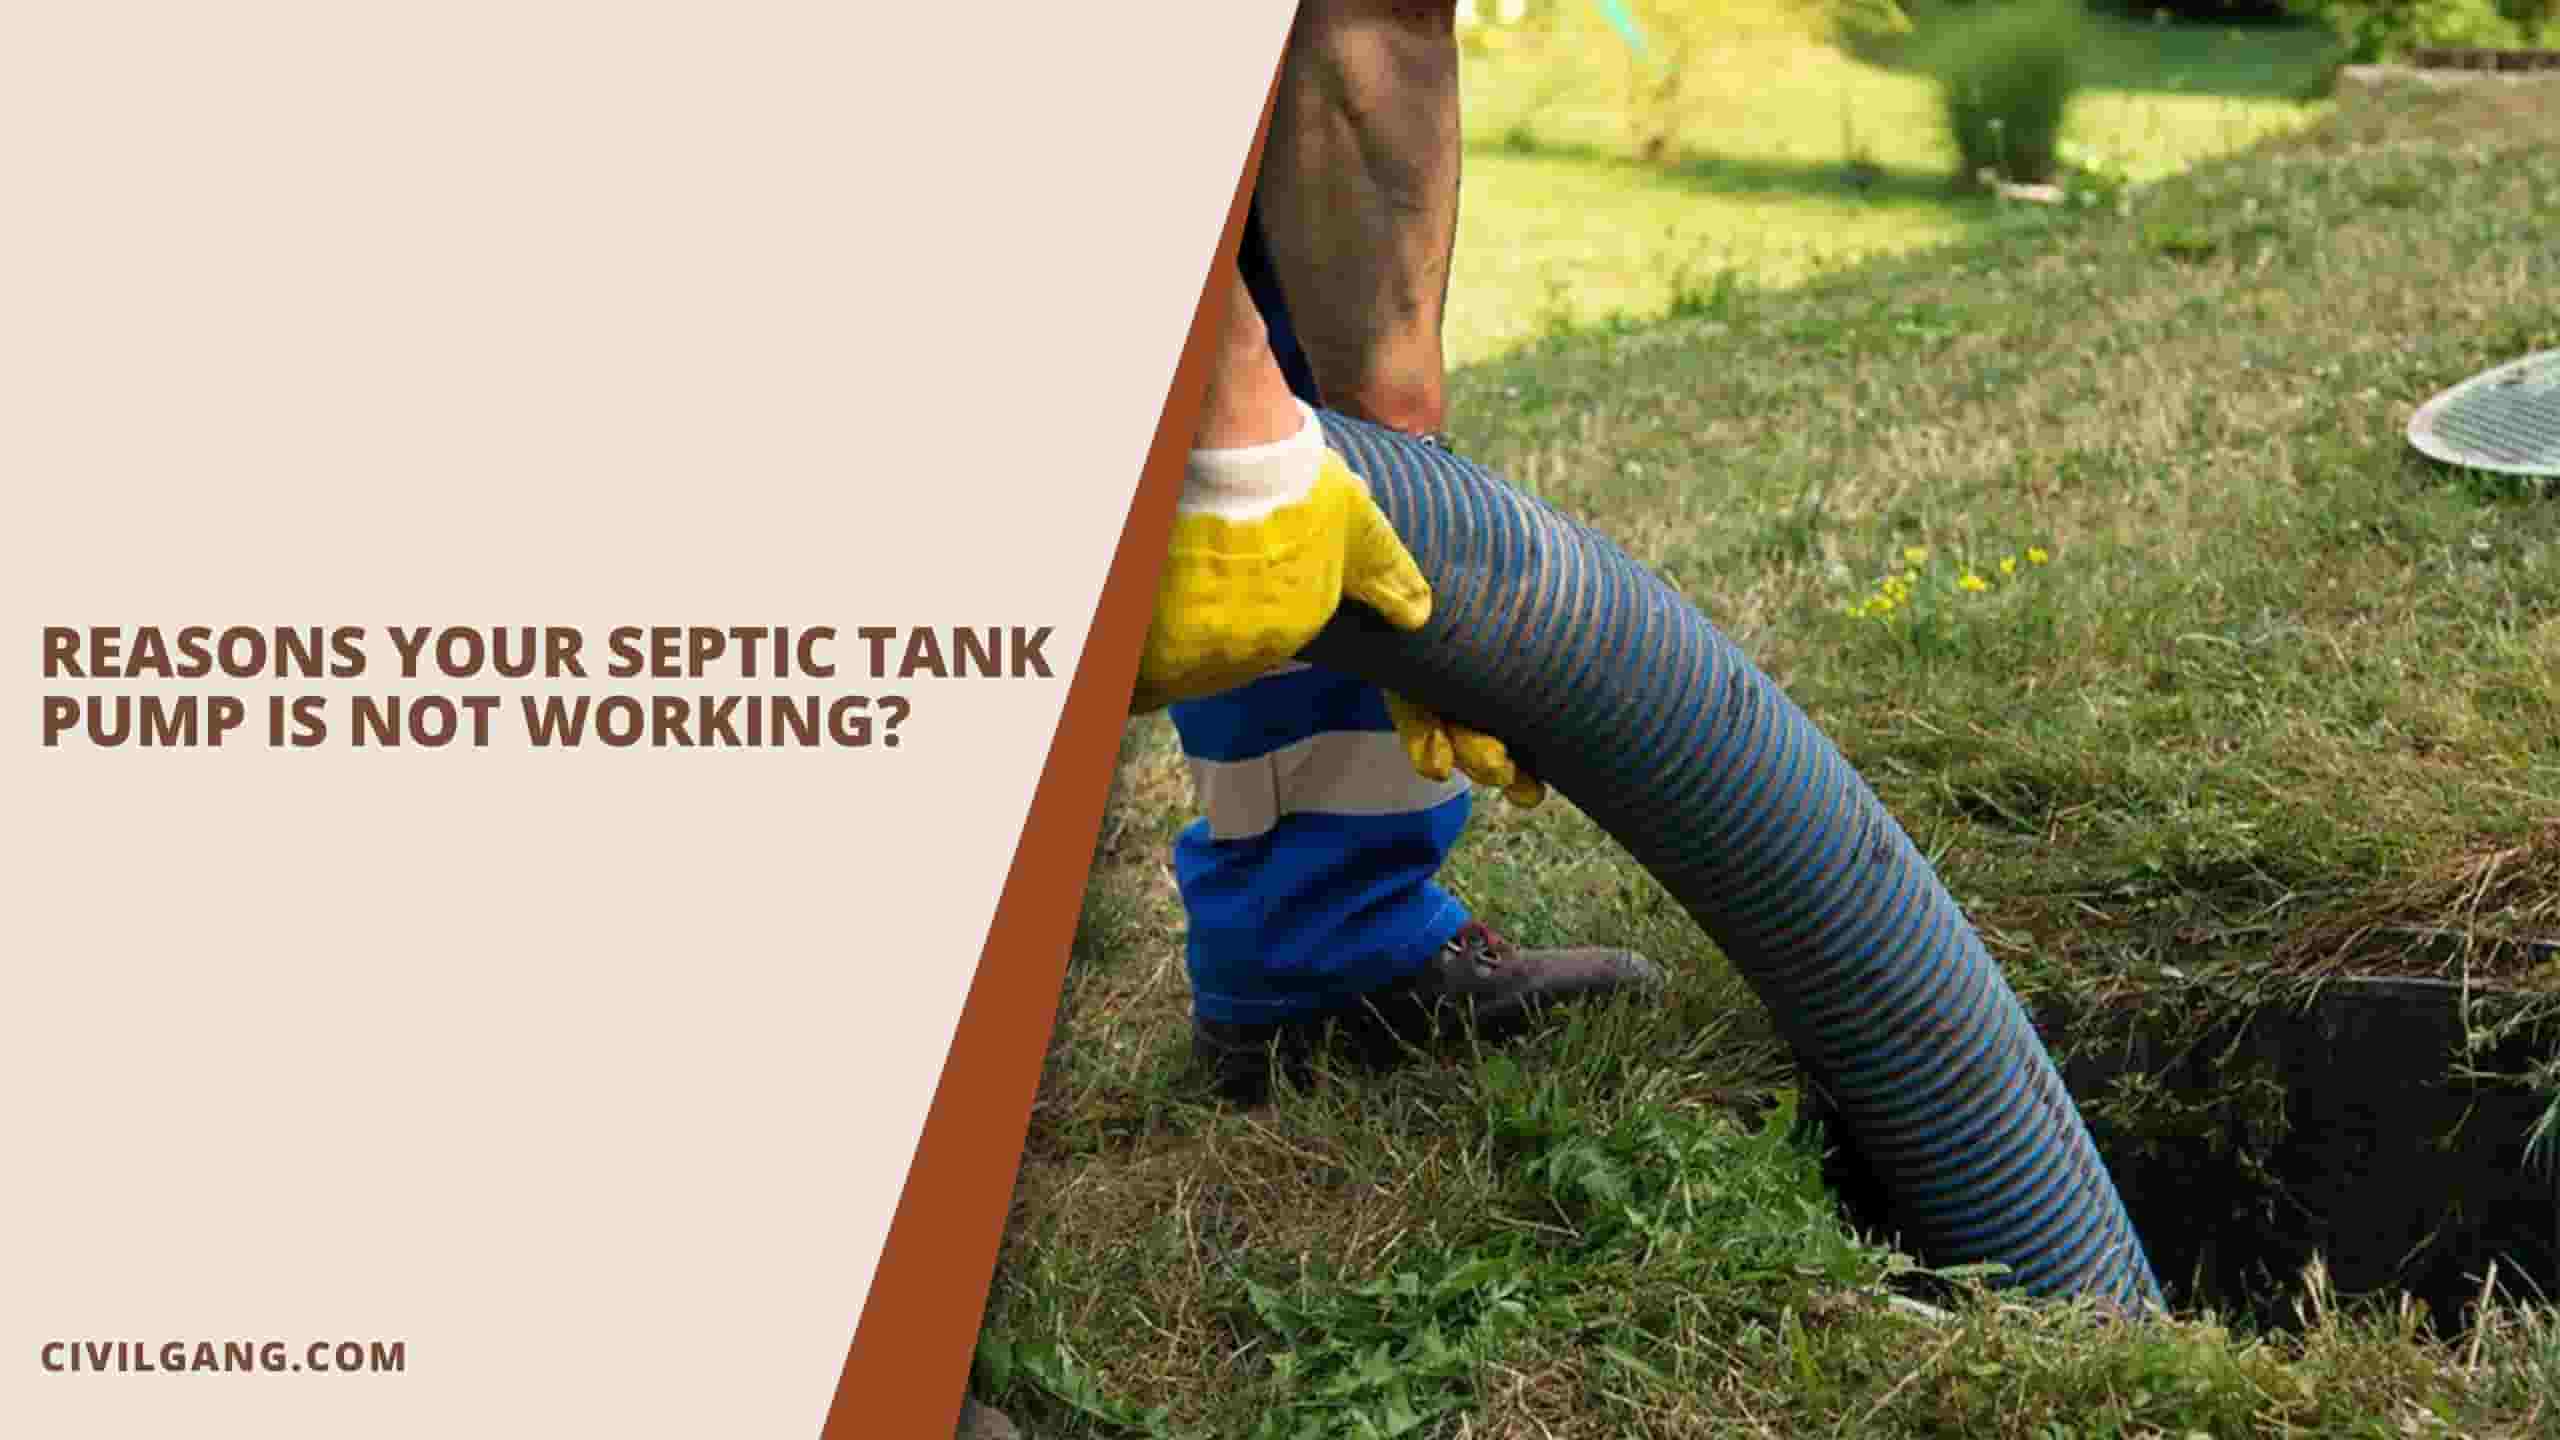 Reasons Your Septic Tank Pump Is Not Working